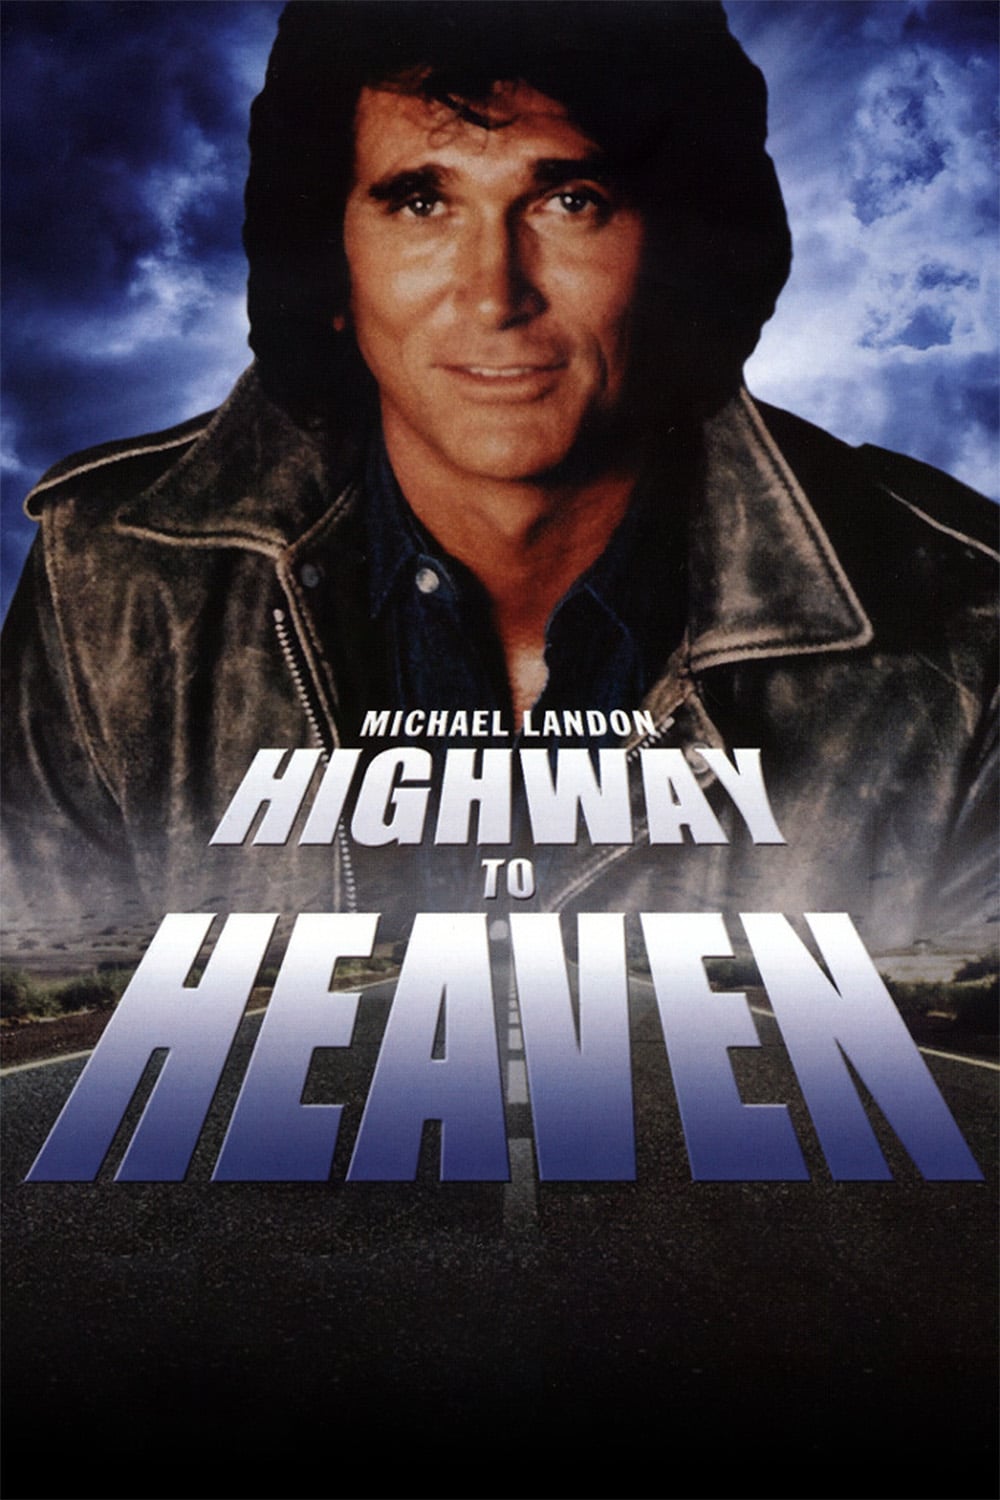 Highway to Heaven Picture